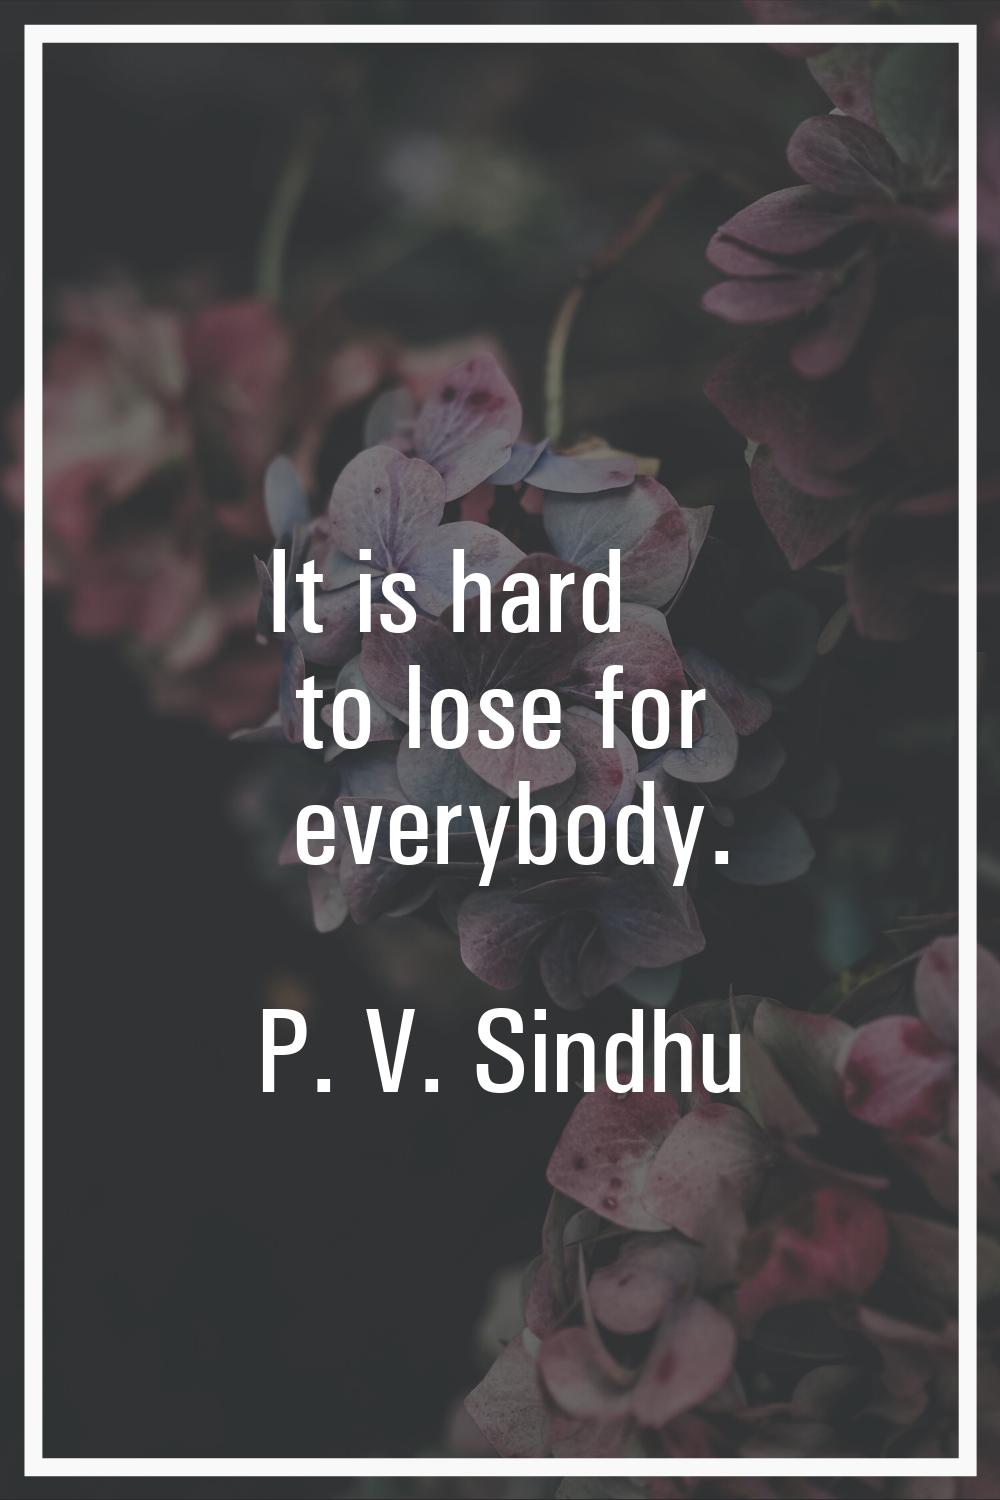 It is hard to lose for everybody.